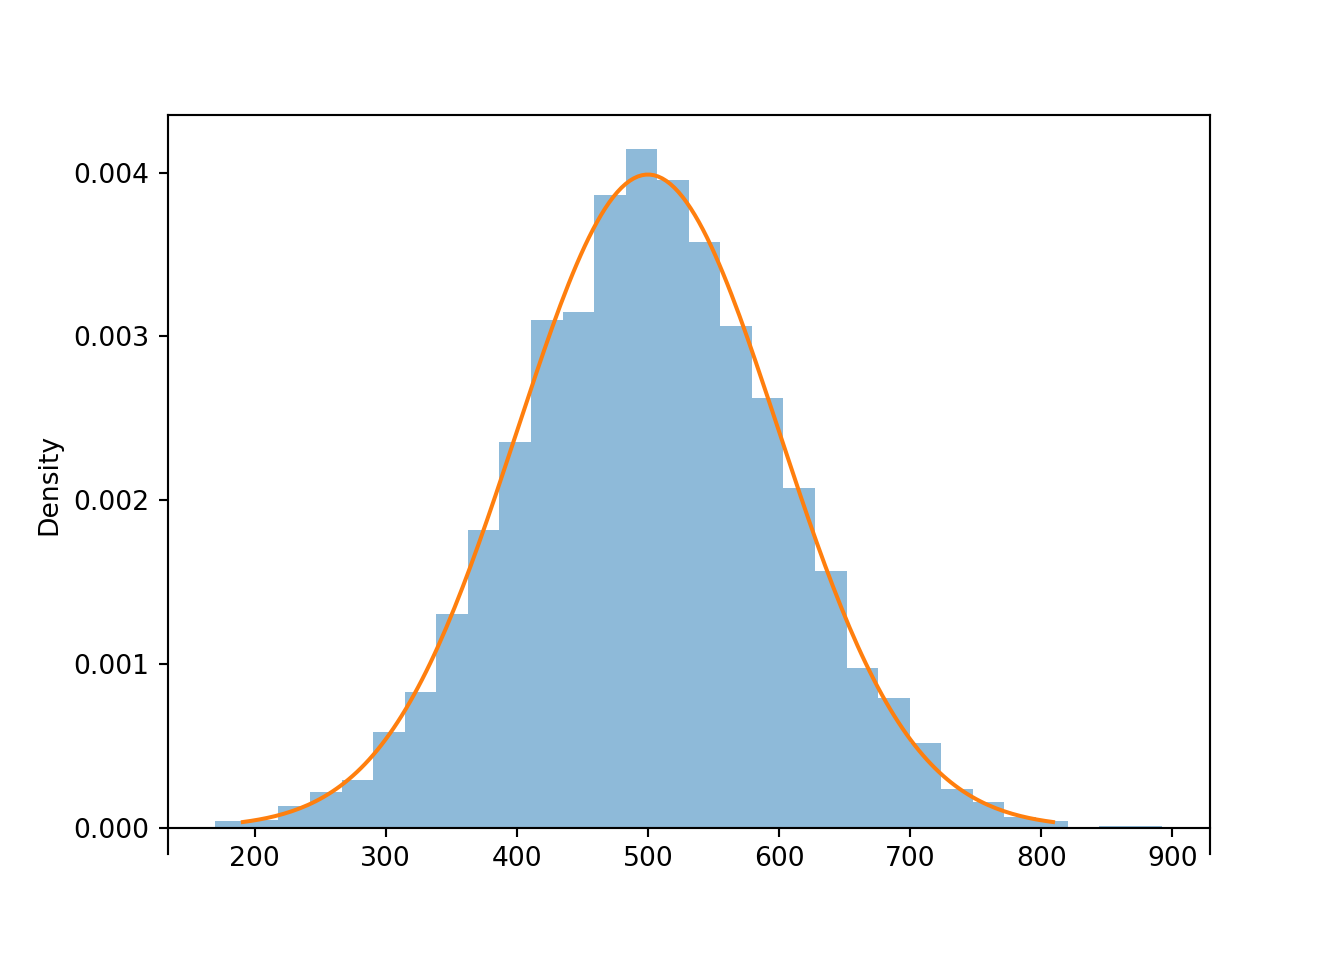 Histogram representing the approximate distribution of values simulated using the spinner in Figure 2.14. The smooth solid curve models the theoretical shape of the distribution, called the “Normal(30, 10)” distribution.